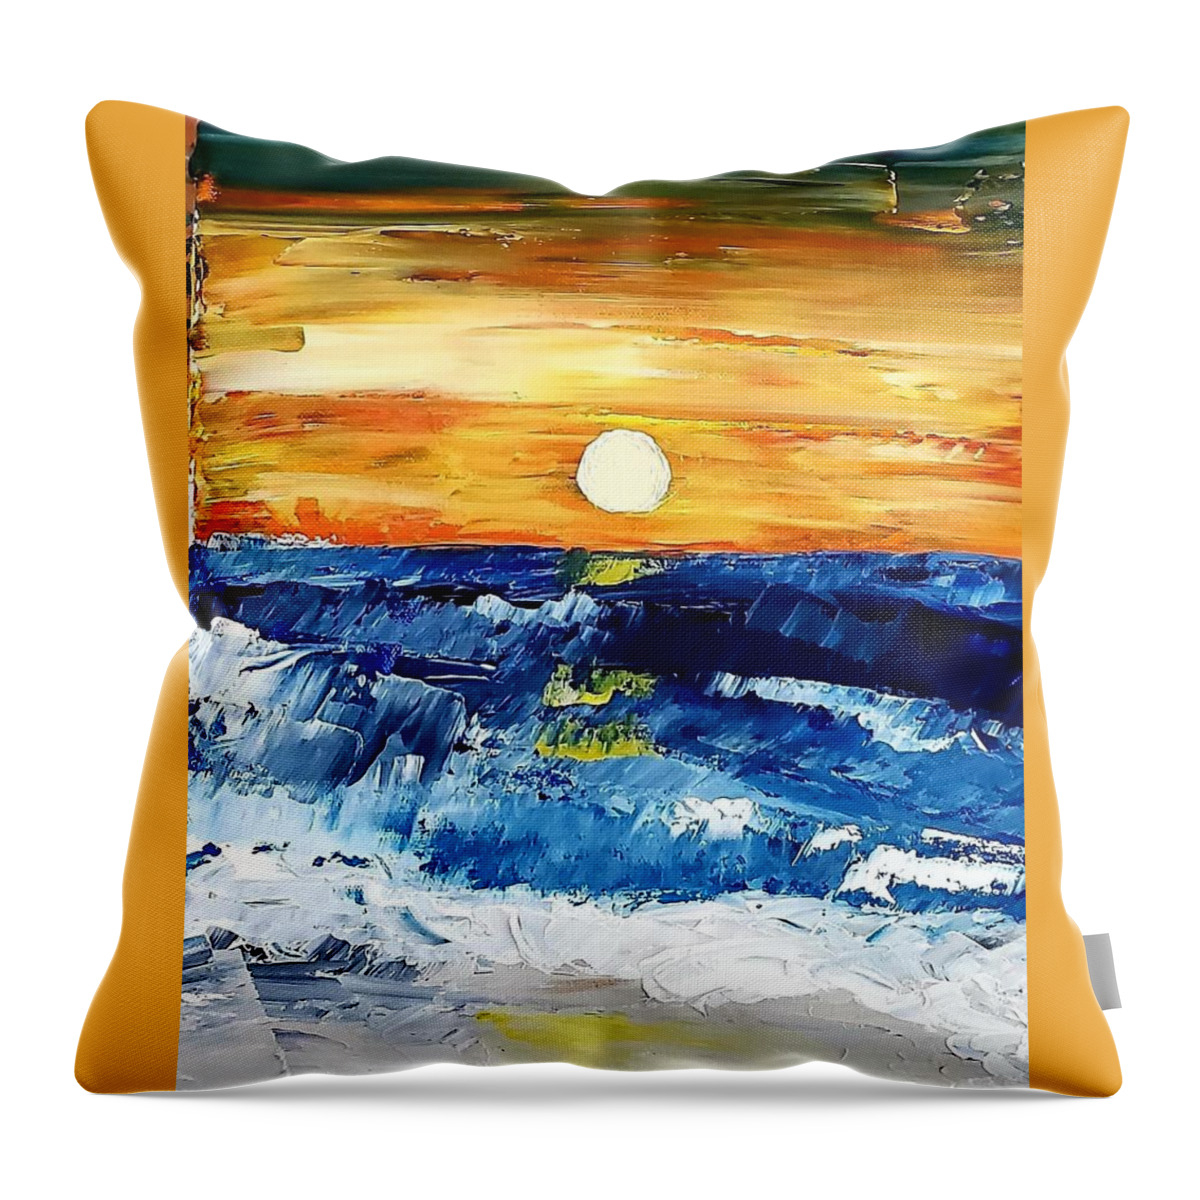  Throw Pillow featuring the painting Ocean Sunset by Amy Kuenzie